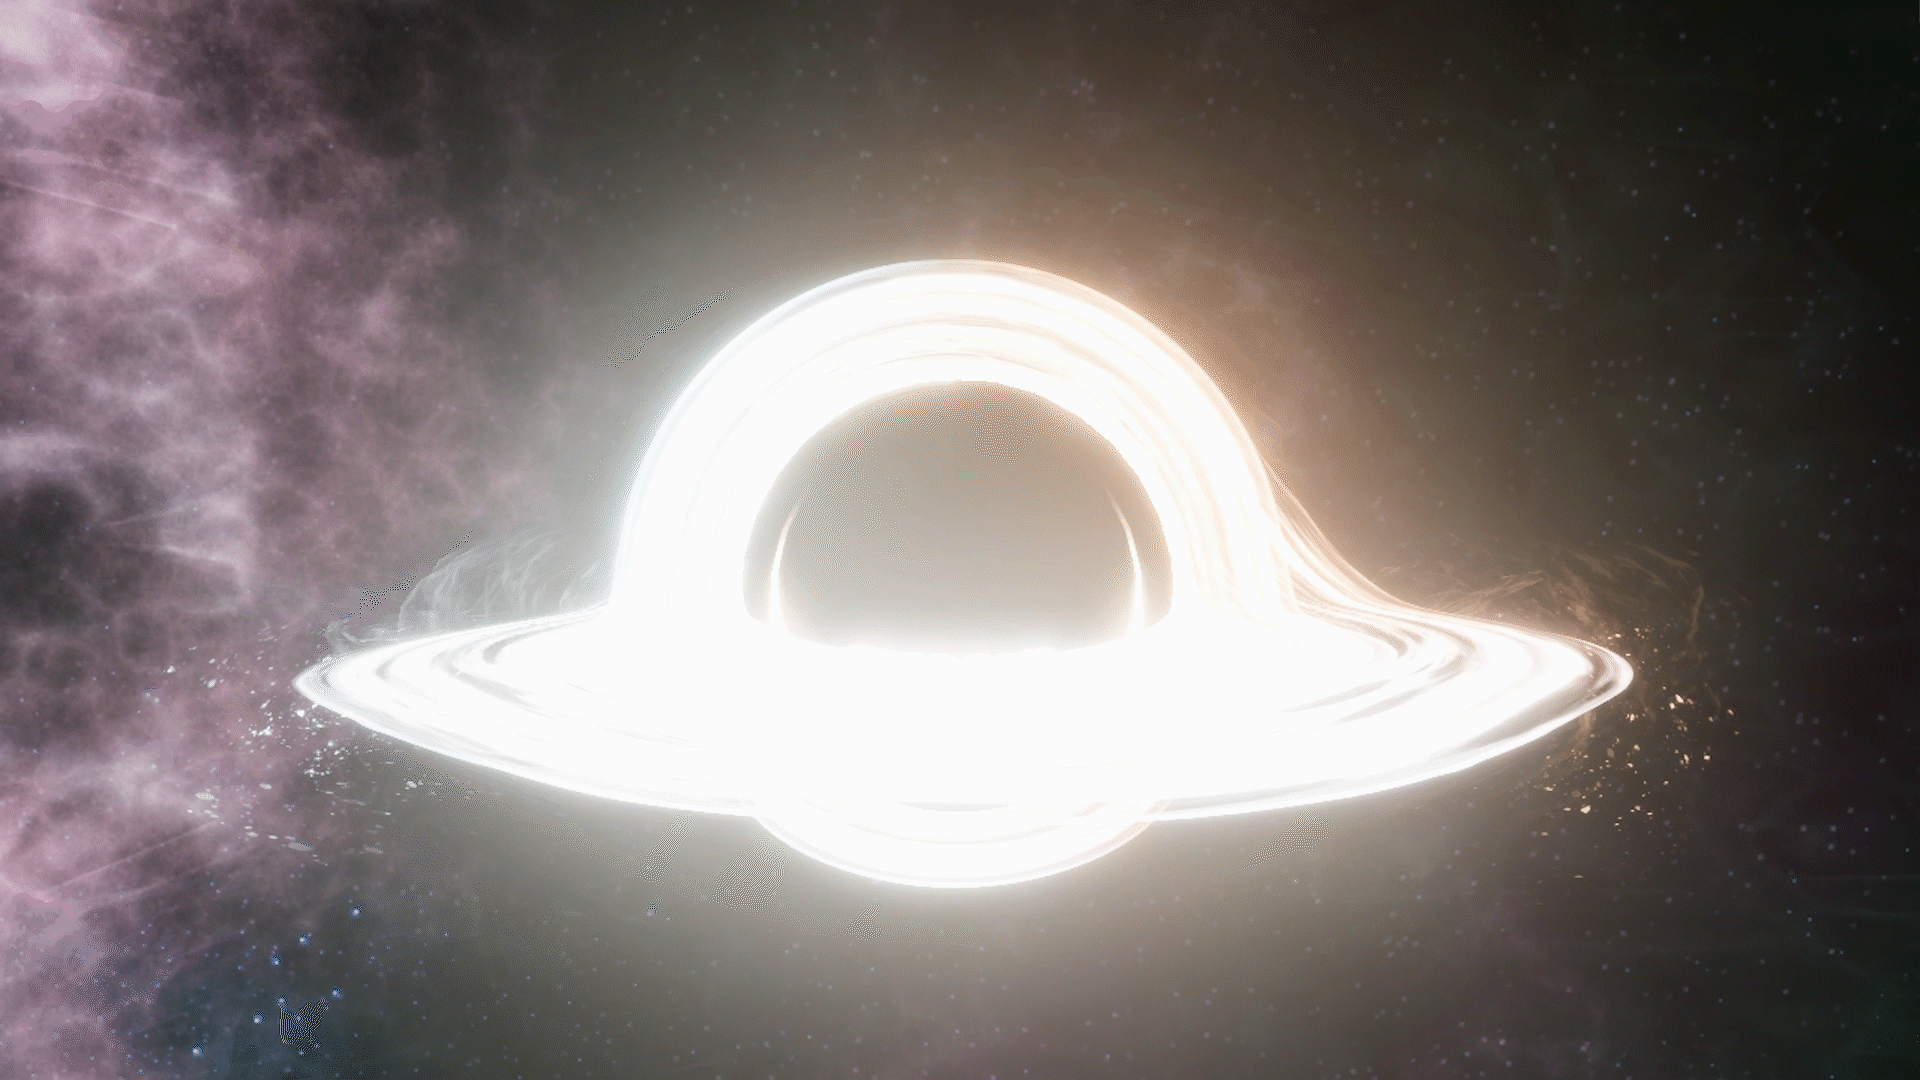 Black Gif,Space Gif,Black Hole Gif,Outer Space Gif,Planet Gif,Spacetime Gif